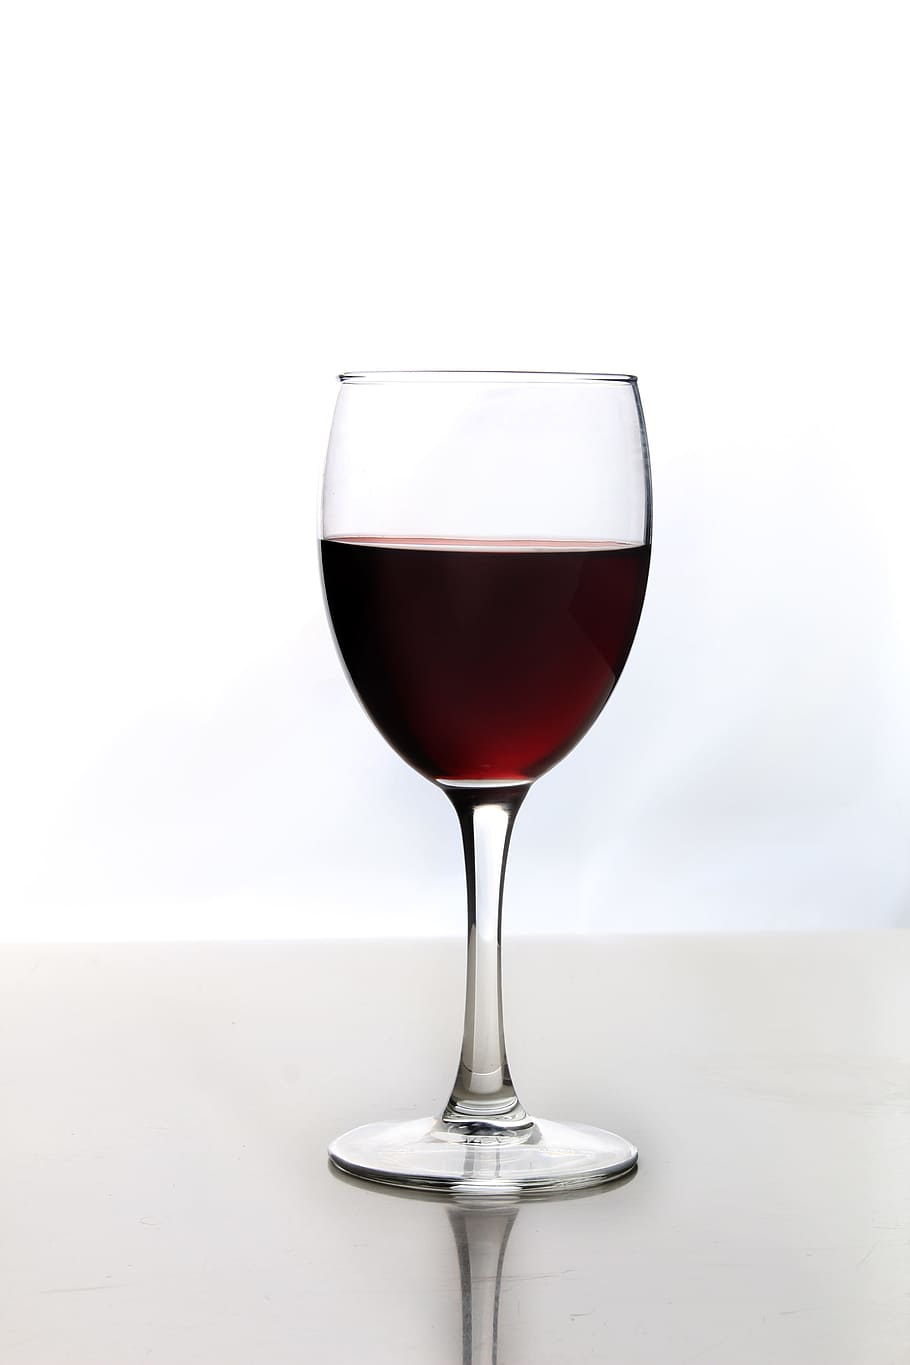 long-stem glass with wine on white surface, Wine, Glass, Beverage